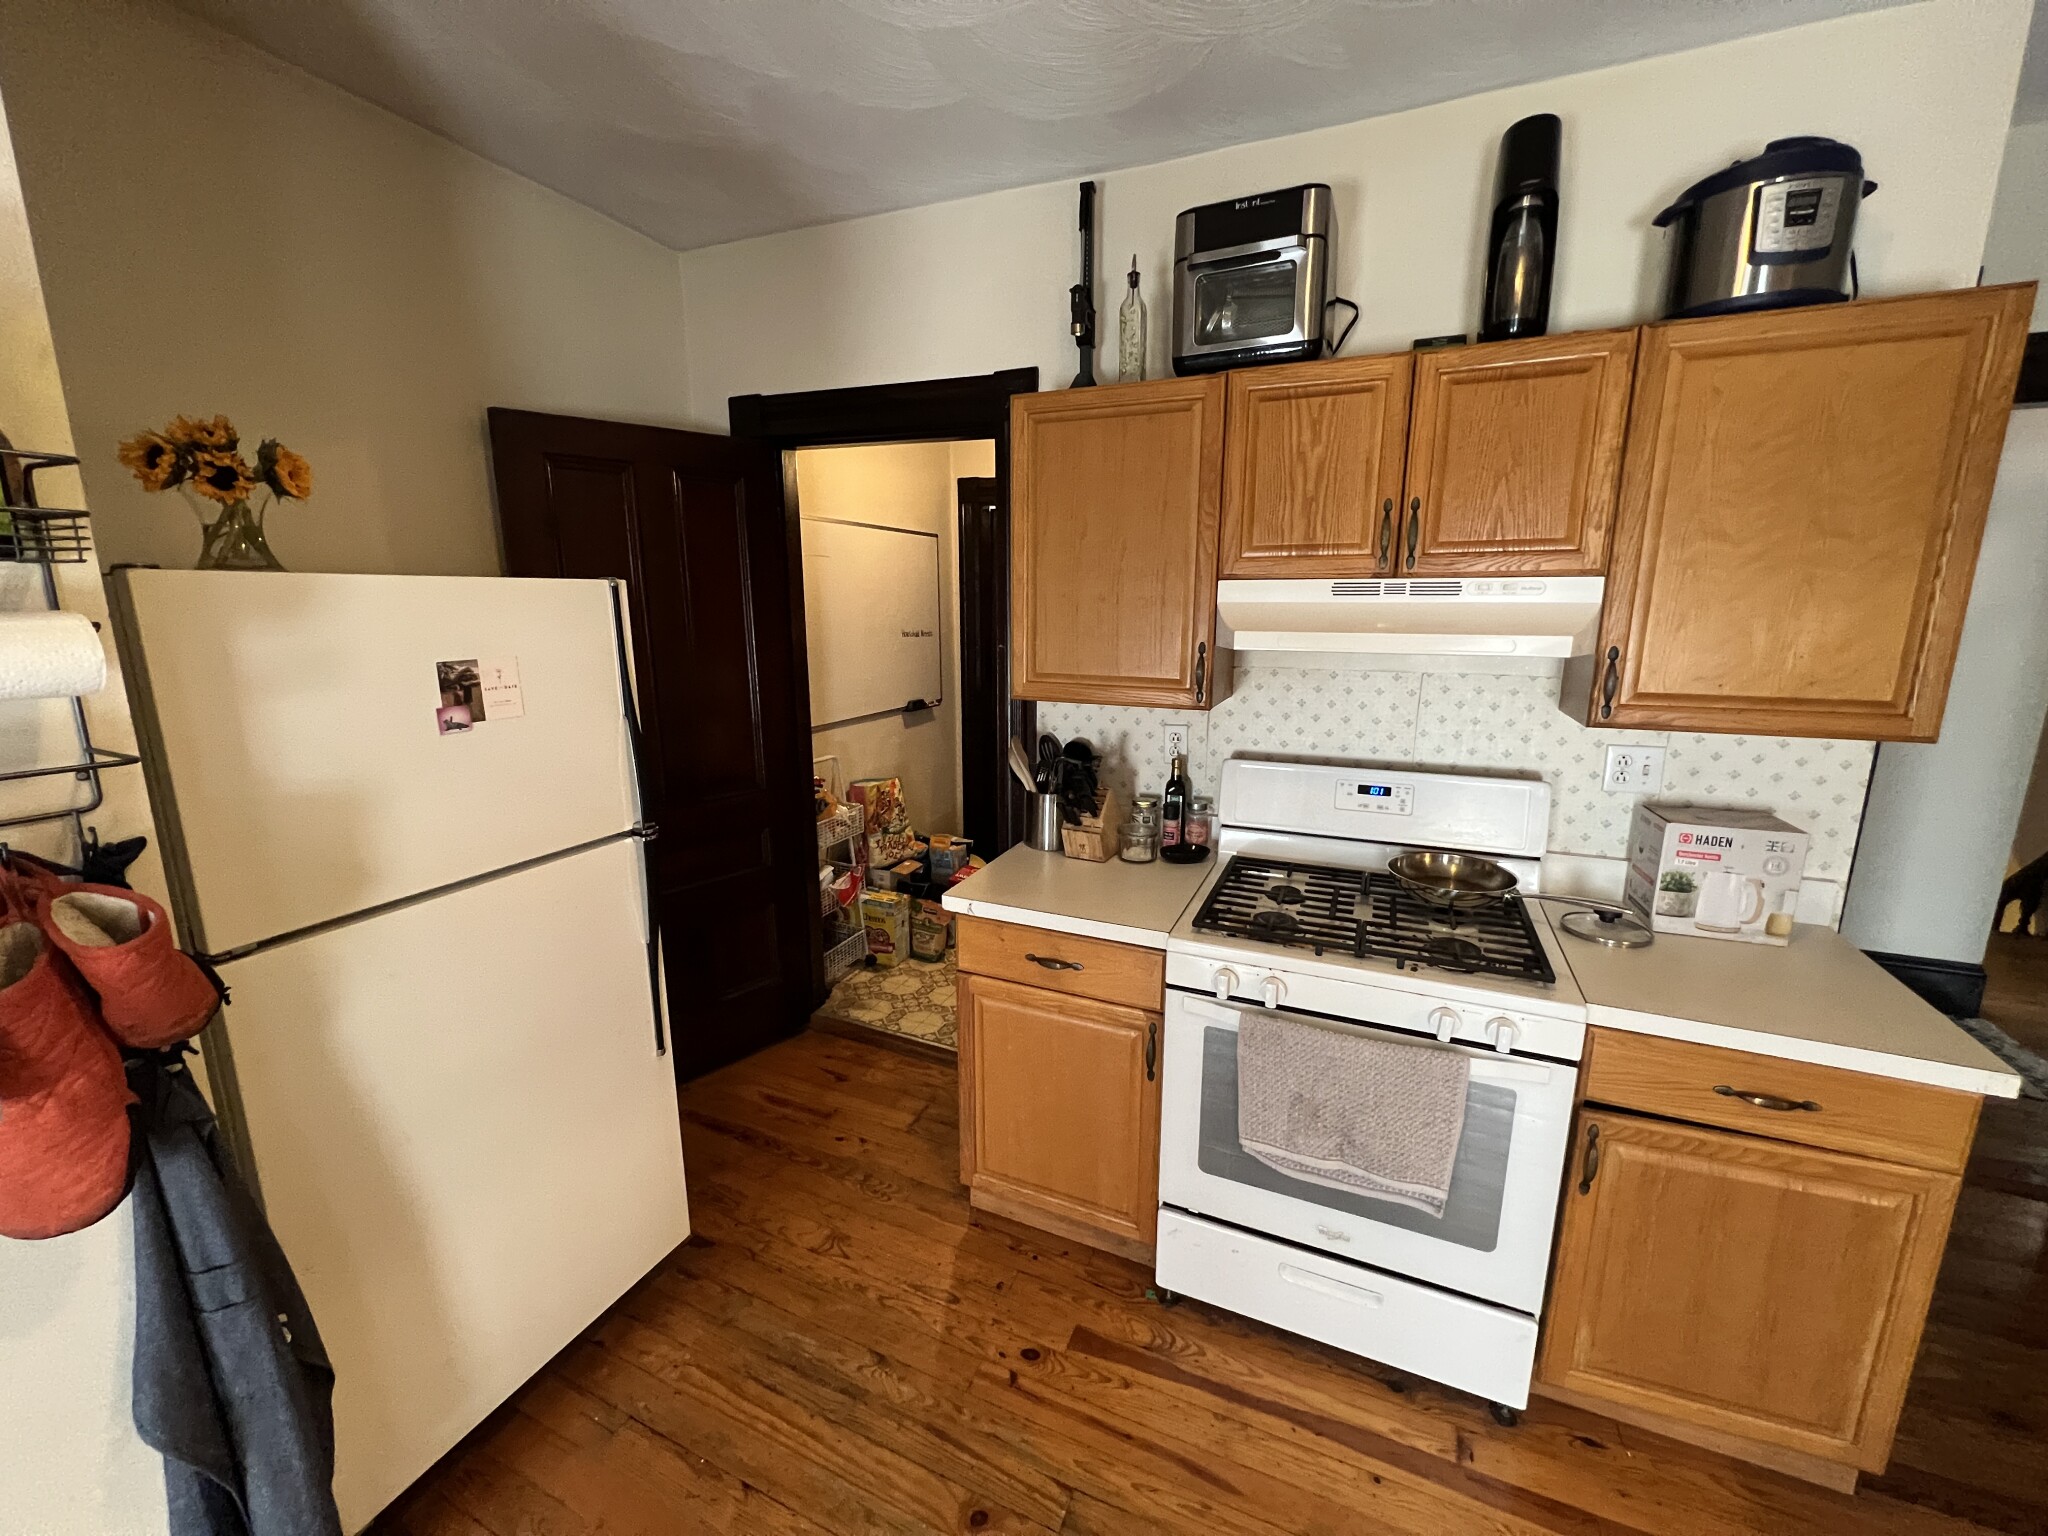 Photos of apartment on Holland St.,Somerville MA 02144